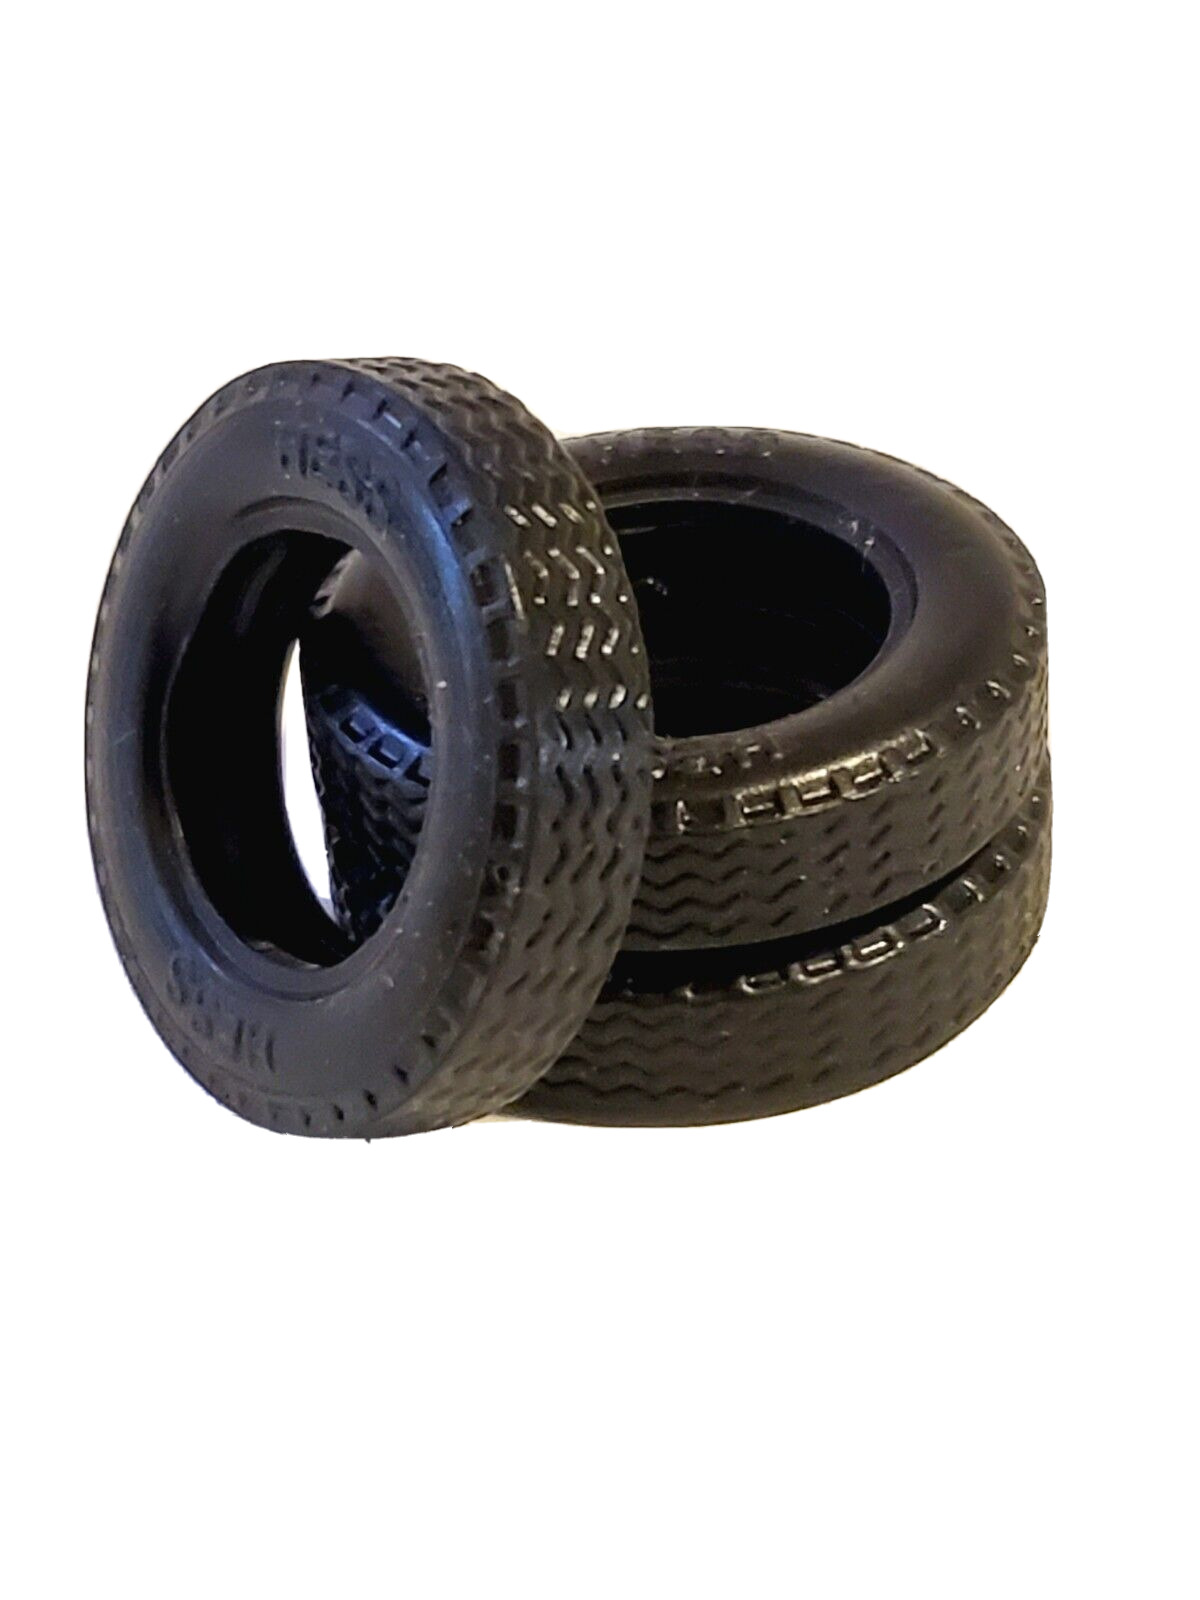 Hess Truck Tires 1/32 Scale 1/4” X 1-1/8\